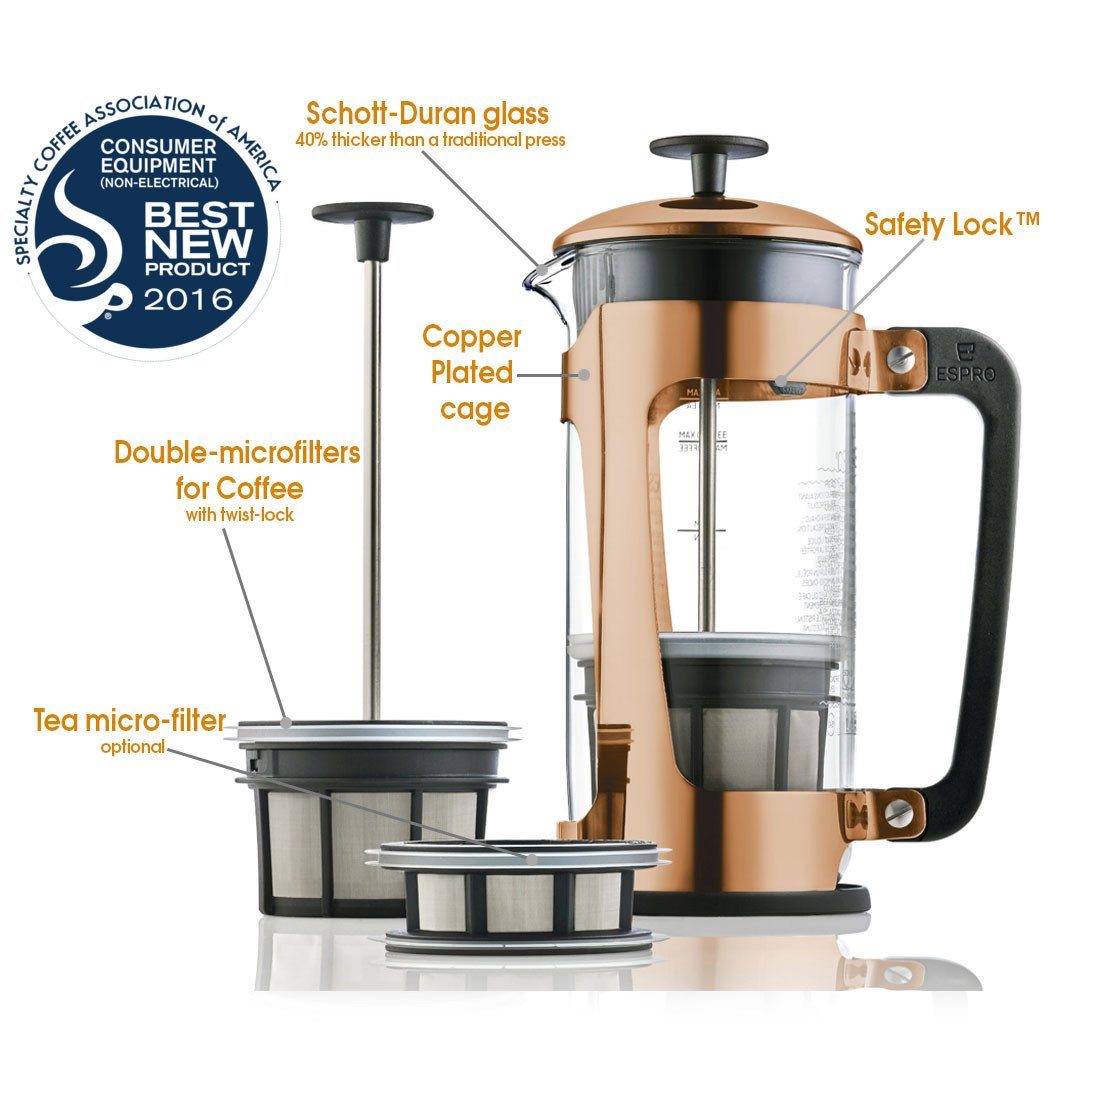 Clever Chef French Press Coffee Maker, Maximum Flavor Coffee